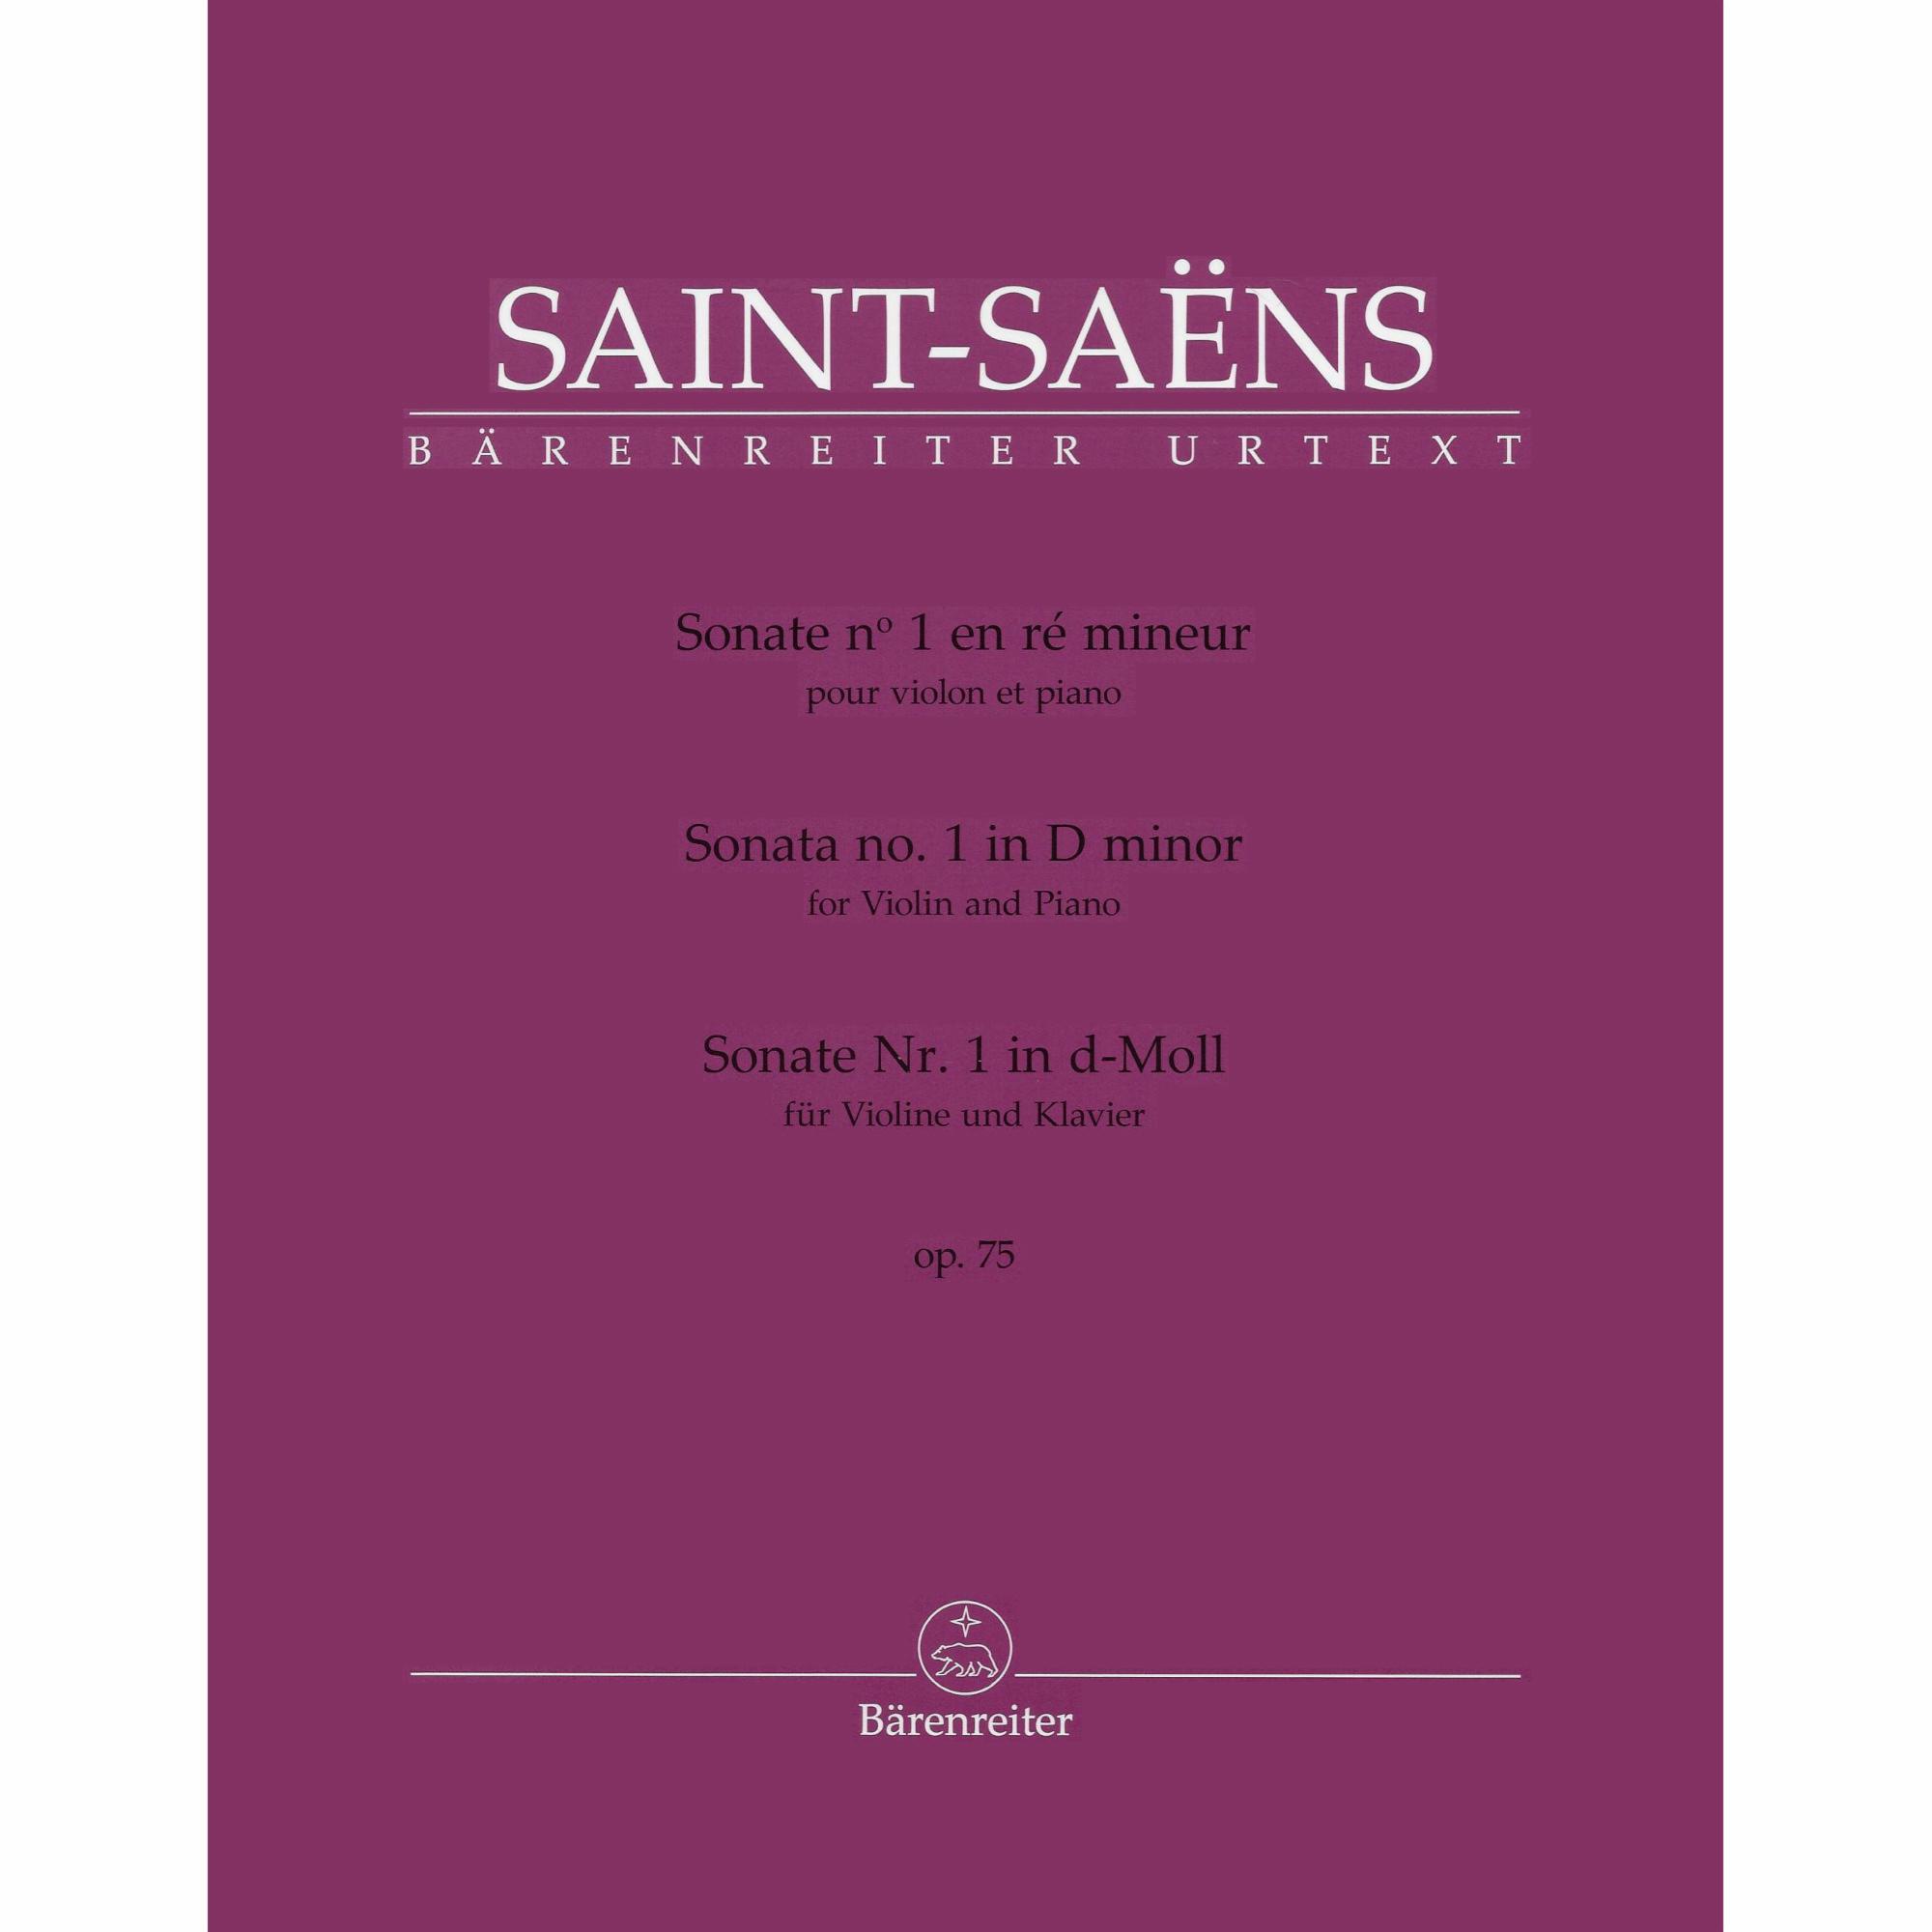 Saint-Saens -- Sonata No. 1 in D Minor, Op. 75 for Violin and Piano